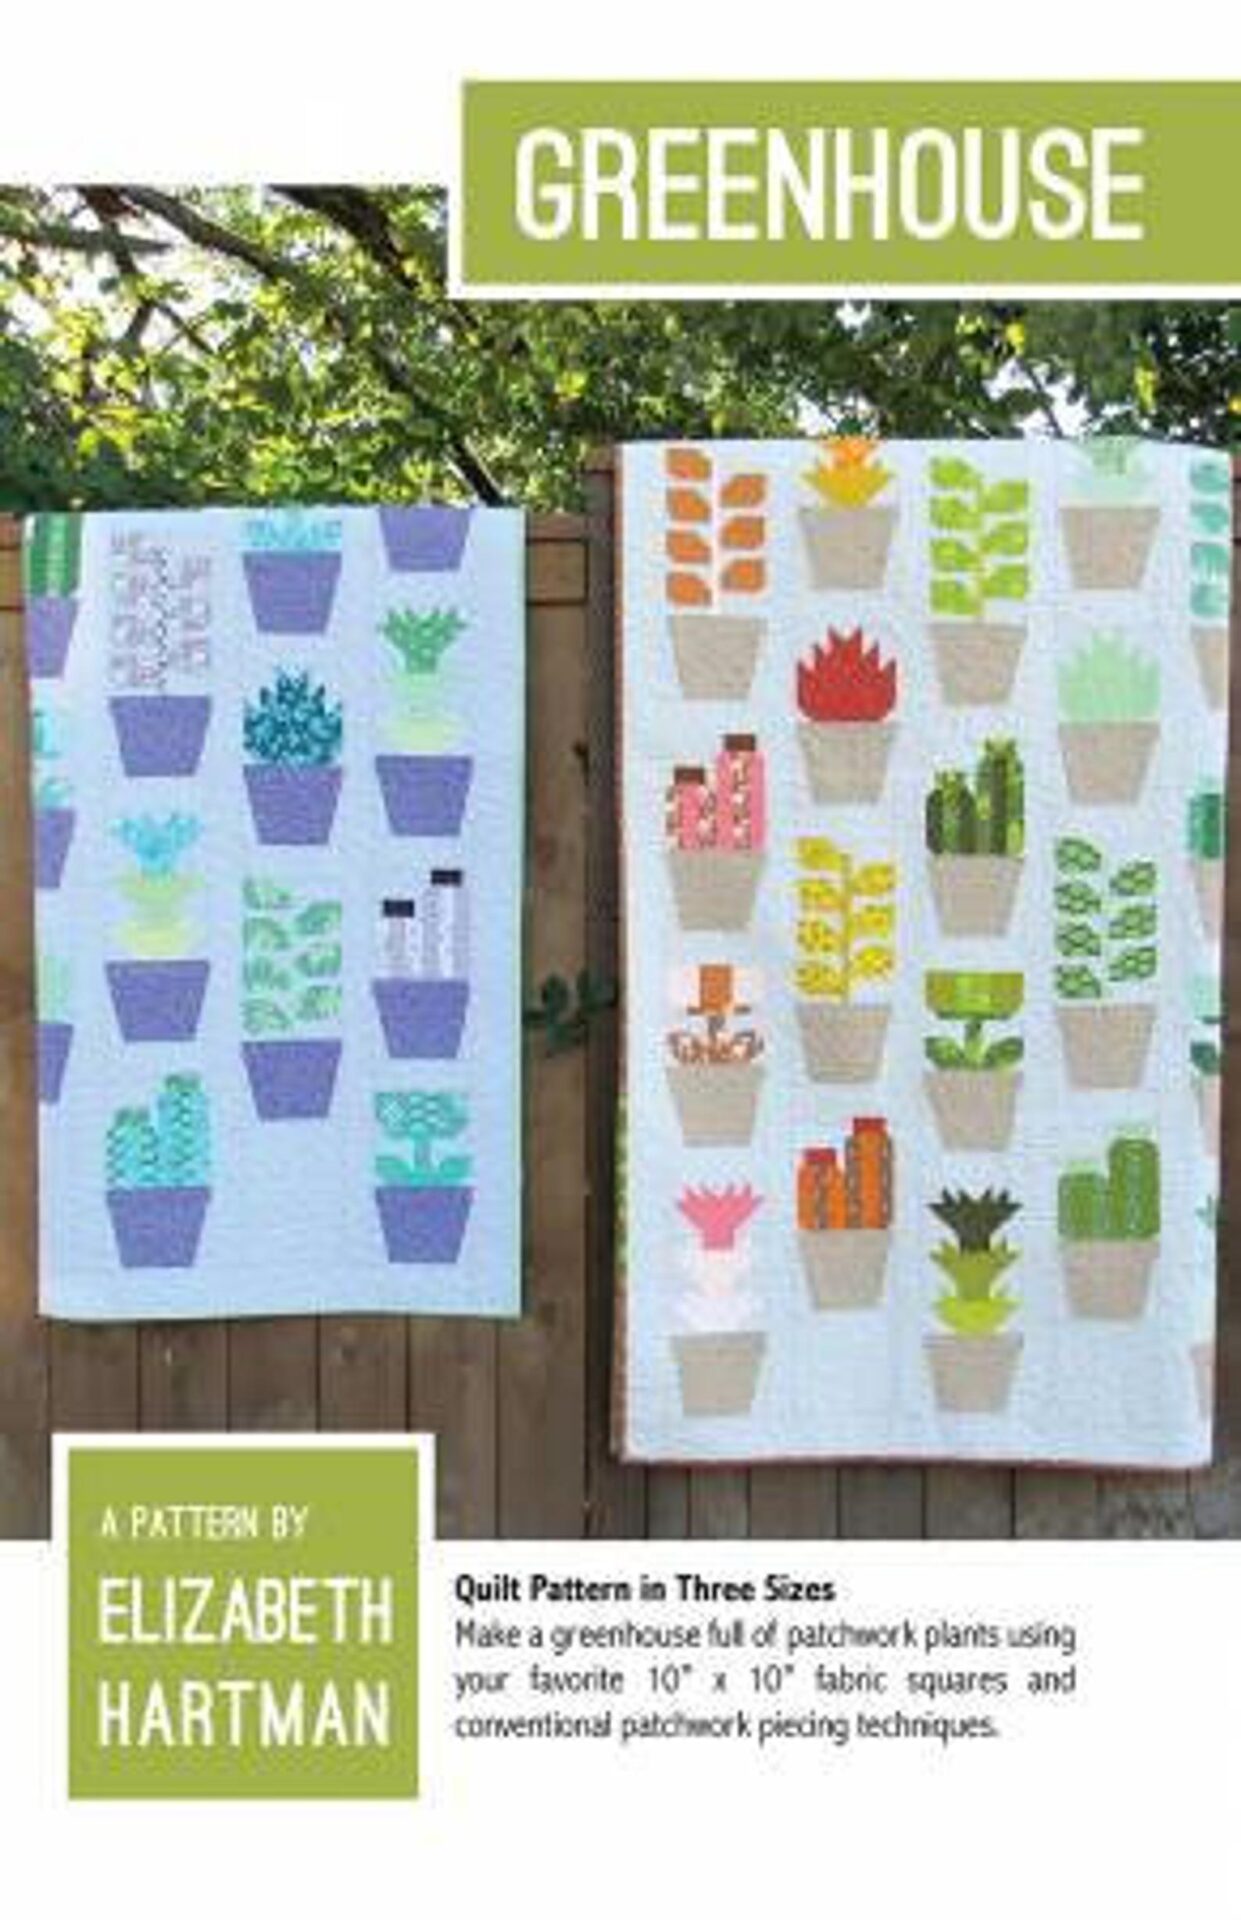 Cactus quilt pattern and kit